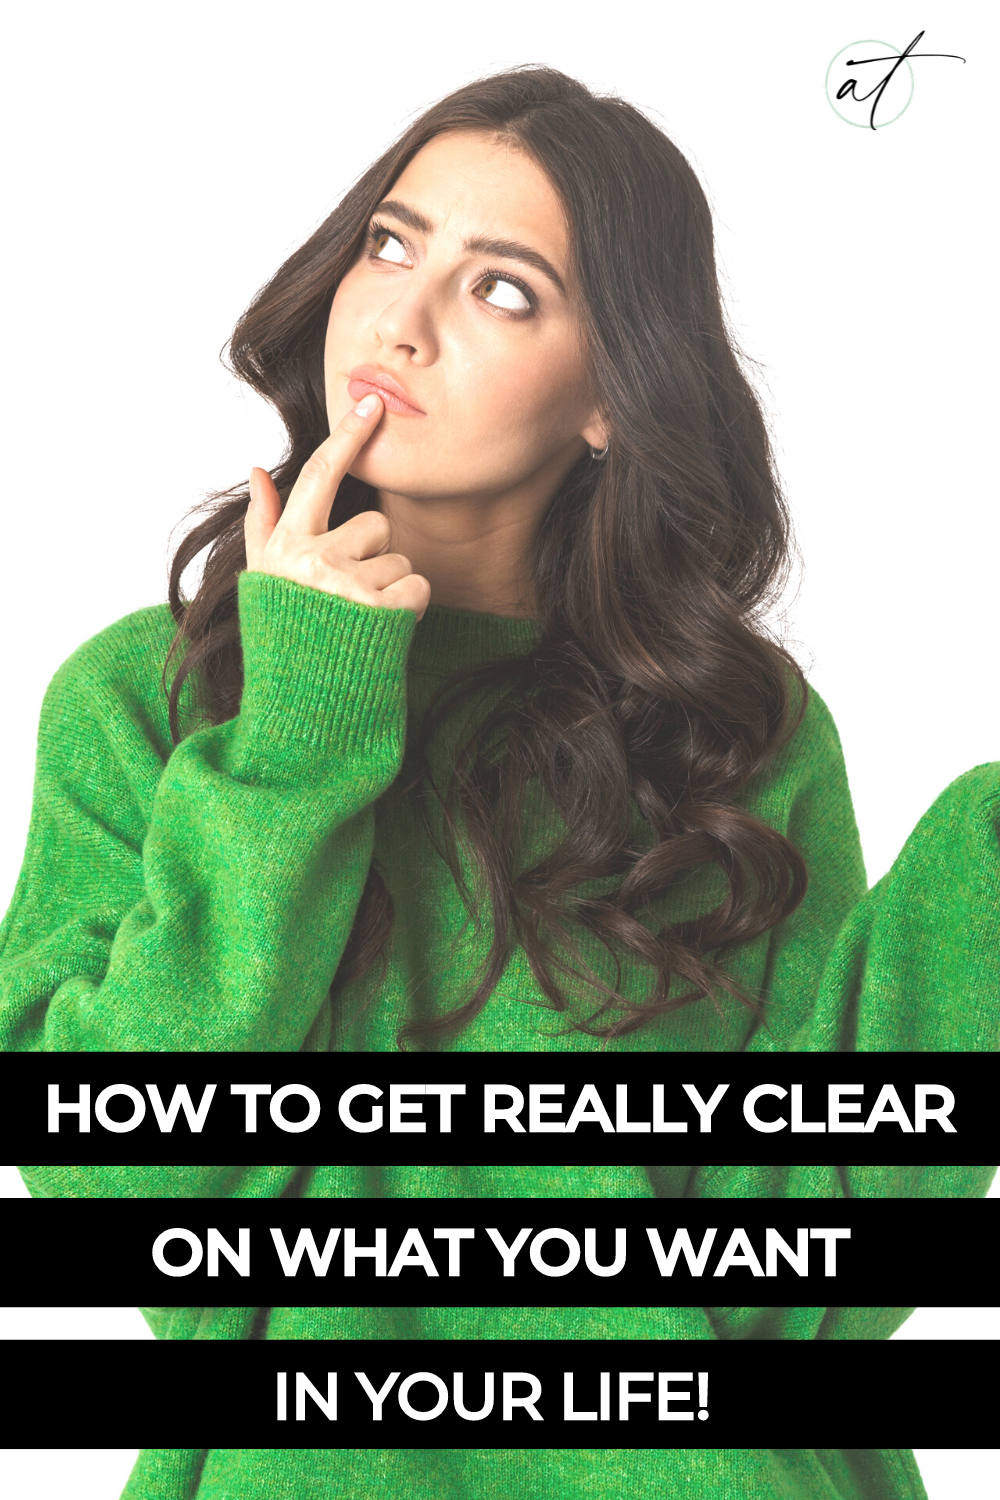 How To Get Really Clear On What You Want In Life! Simple questions you can ask yourself to help you design the life of your dreams. Photo of woman looking confused and unclear on what she wants out of life. 